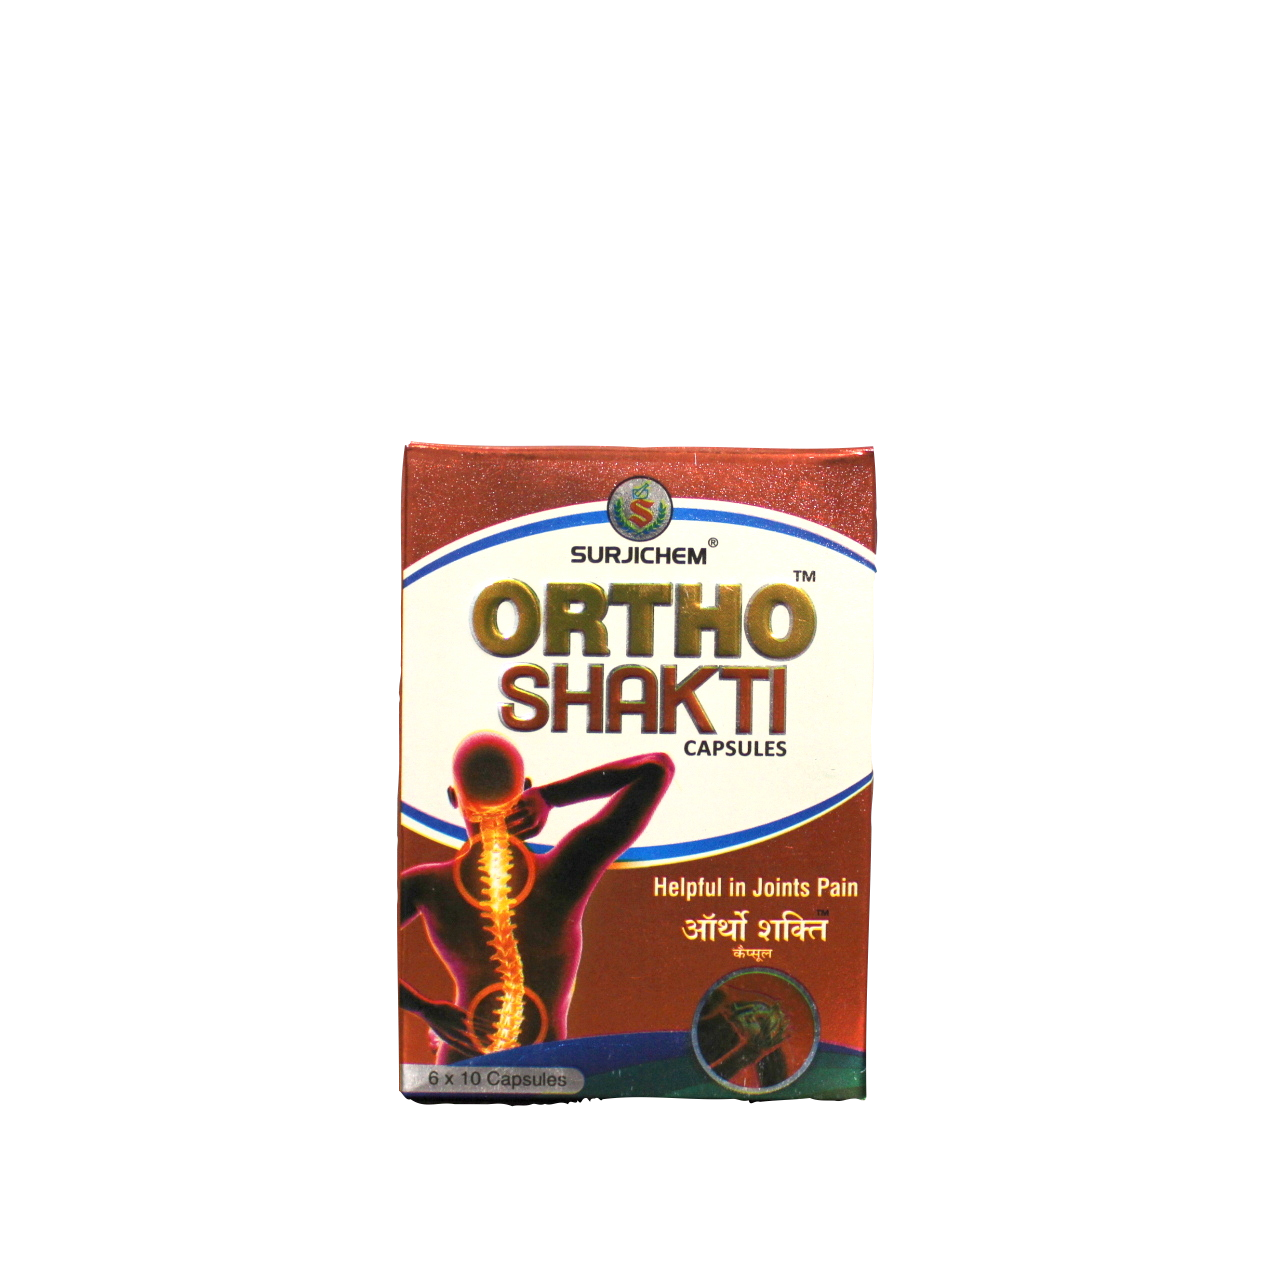 Shop Ortho shakthi capsules - 10capsules at price 60.00 from Surjichem Online - Ayush Care